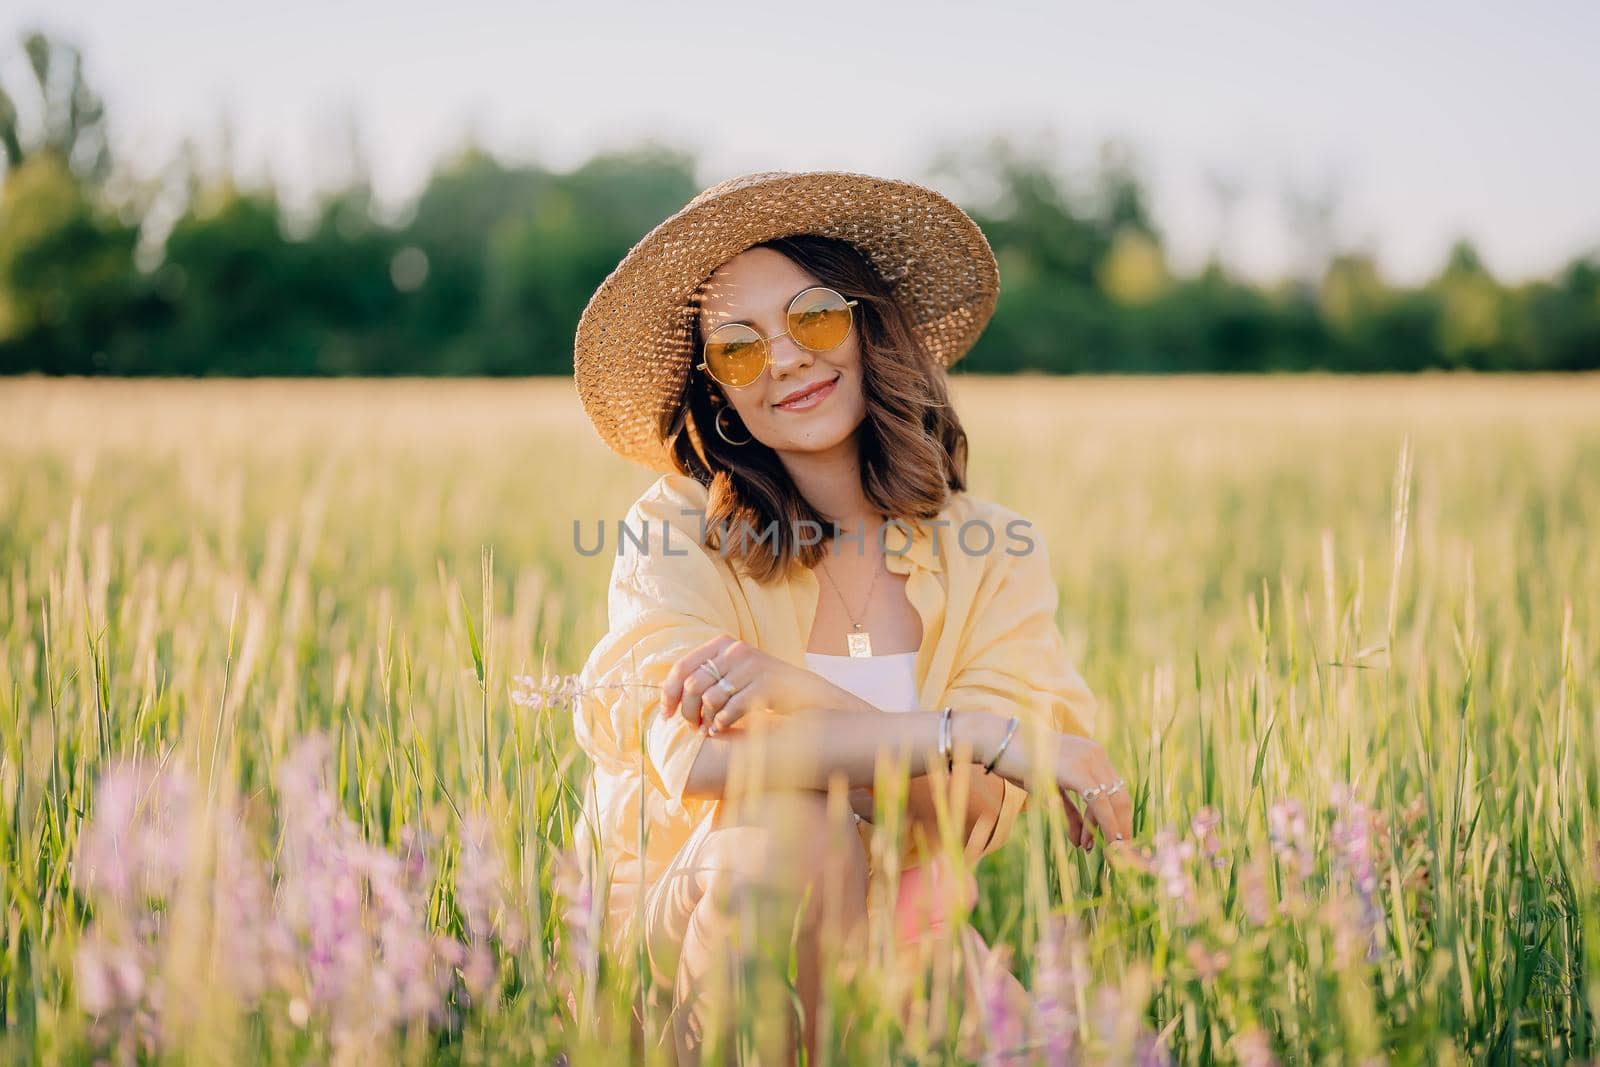 Portrait of rural stylish woman in straw hat posing in fresh wheat field. Grass background. Amazing nature, lifestyle, farmland, growing cereal plants. by kristina_kokhanova